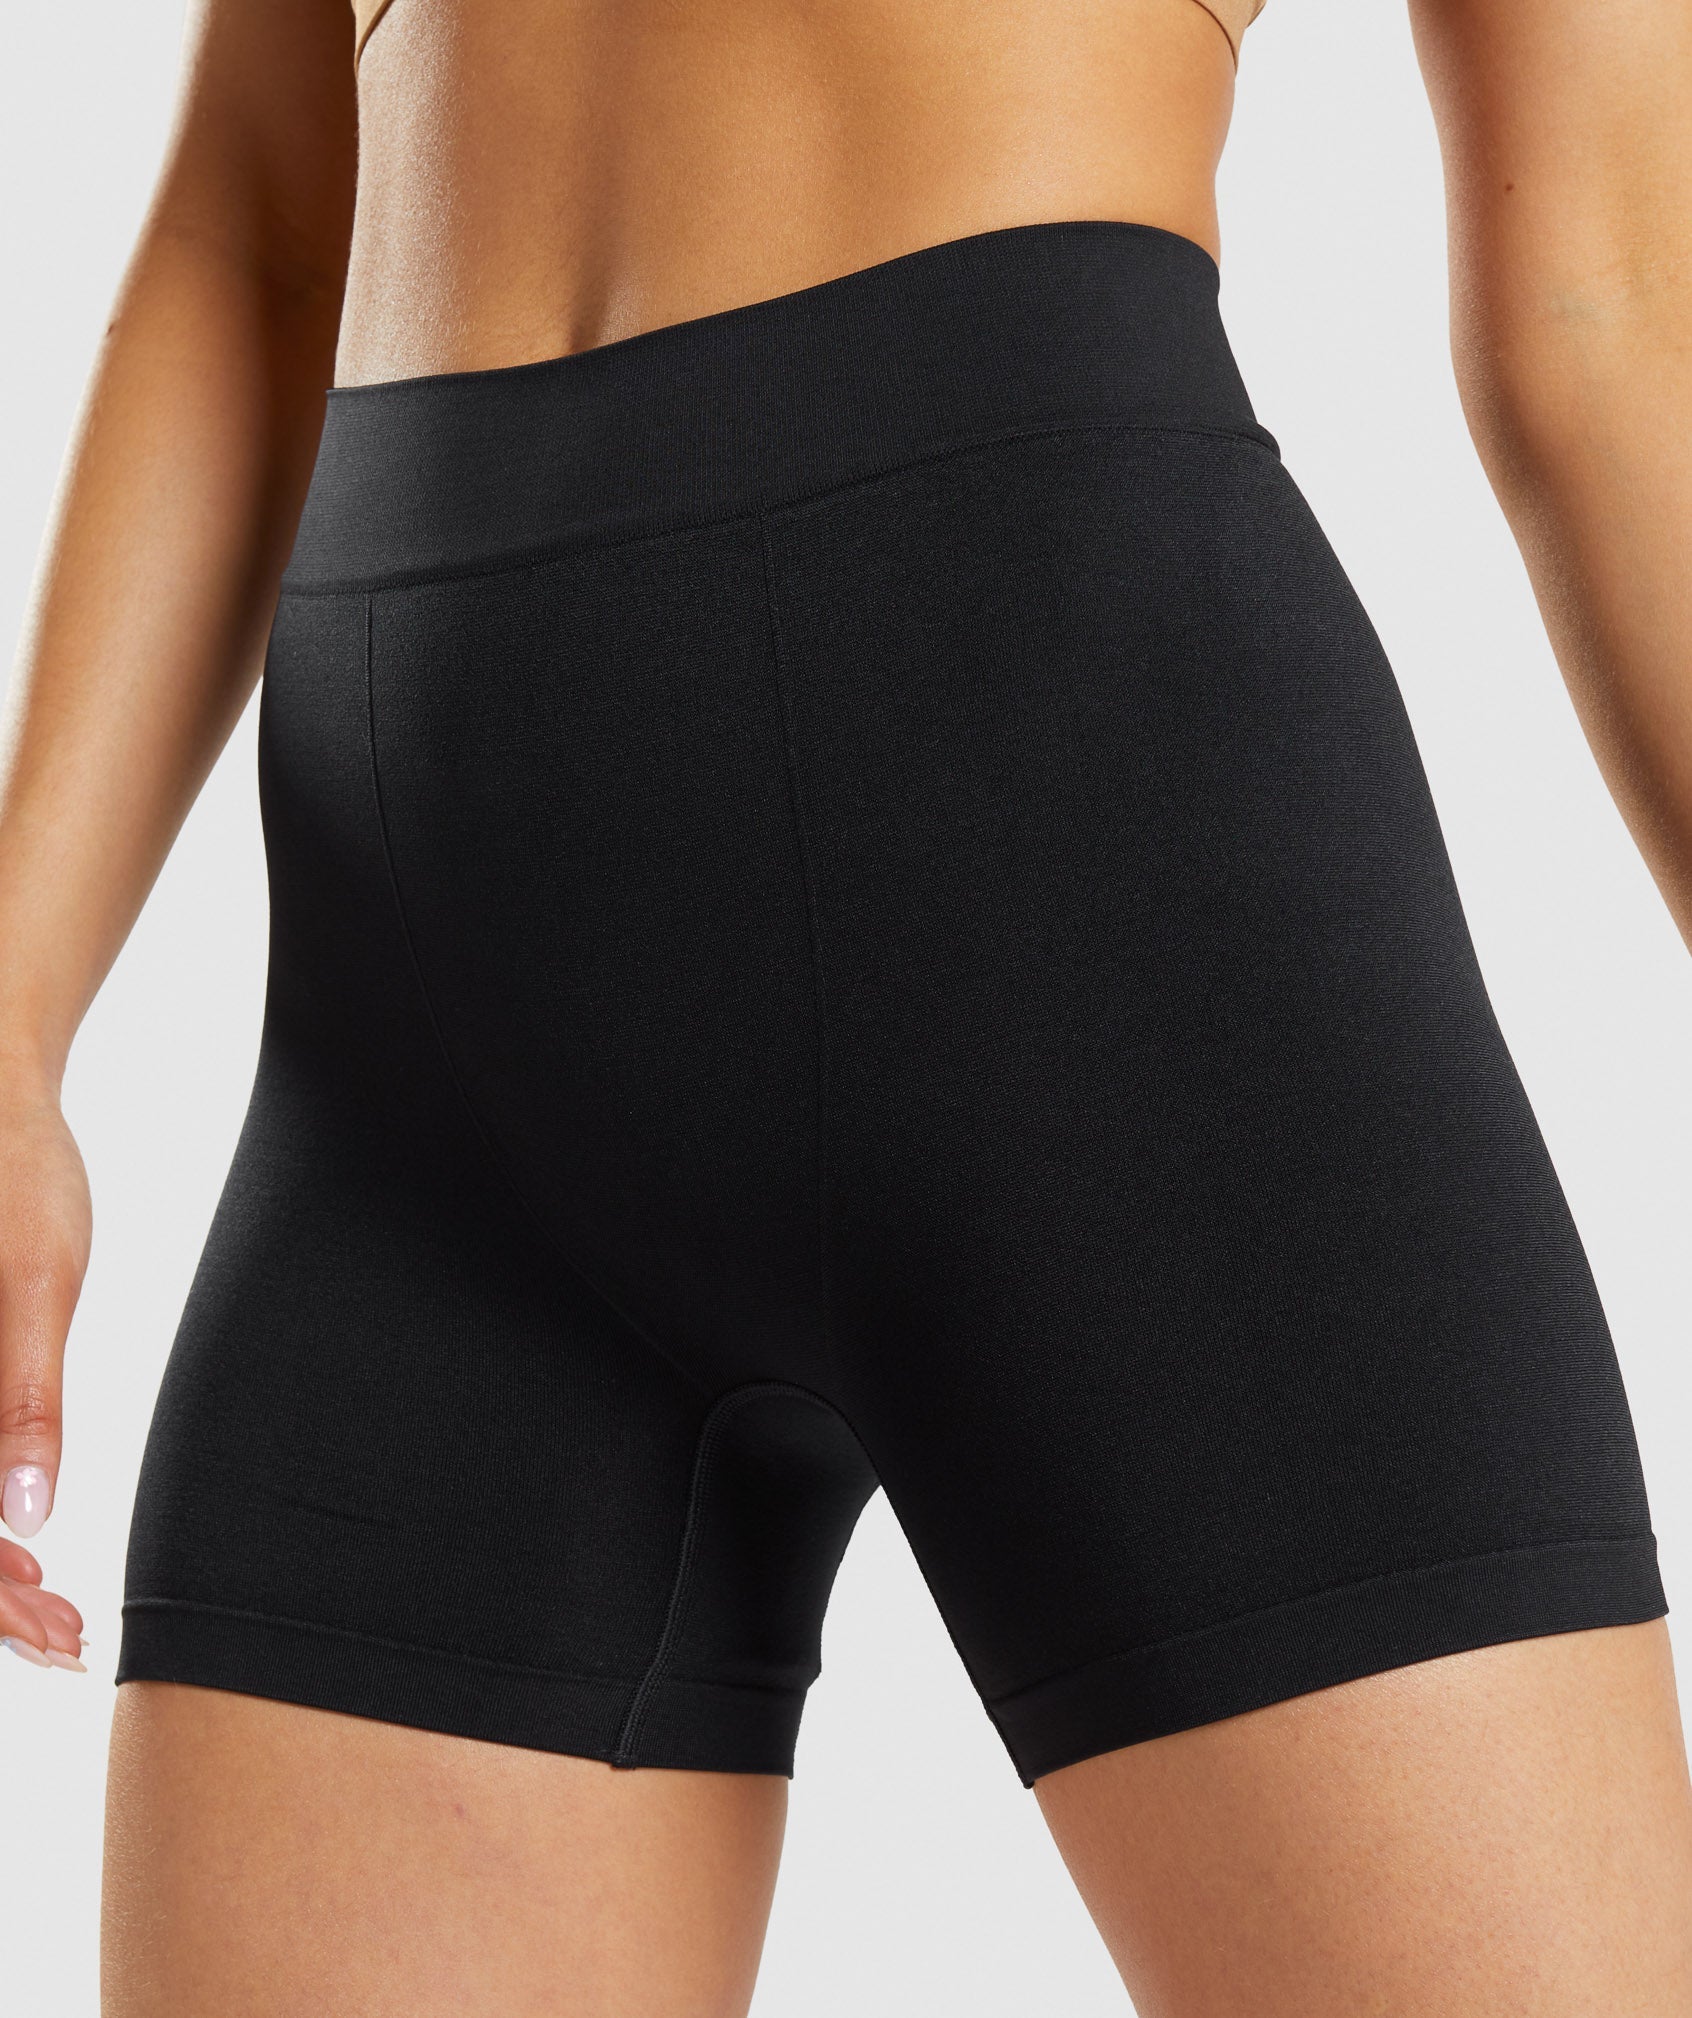 Clothes :: Boxers and underwear :: GymShark Luxe Underwear LIME